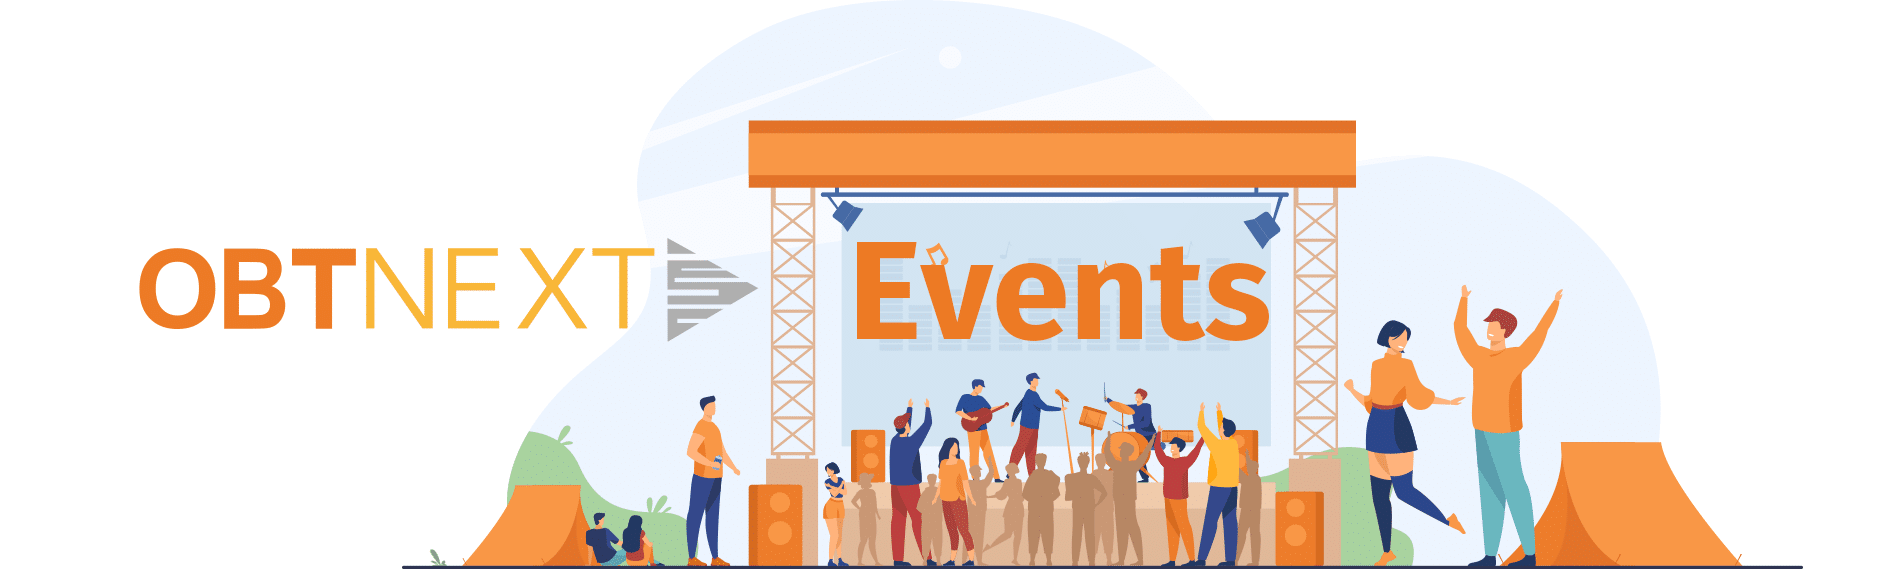 OBTNext Events page header